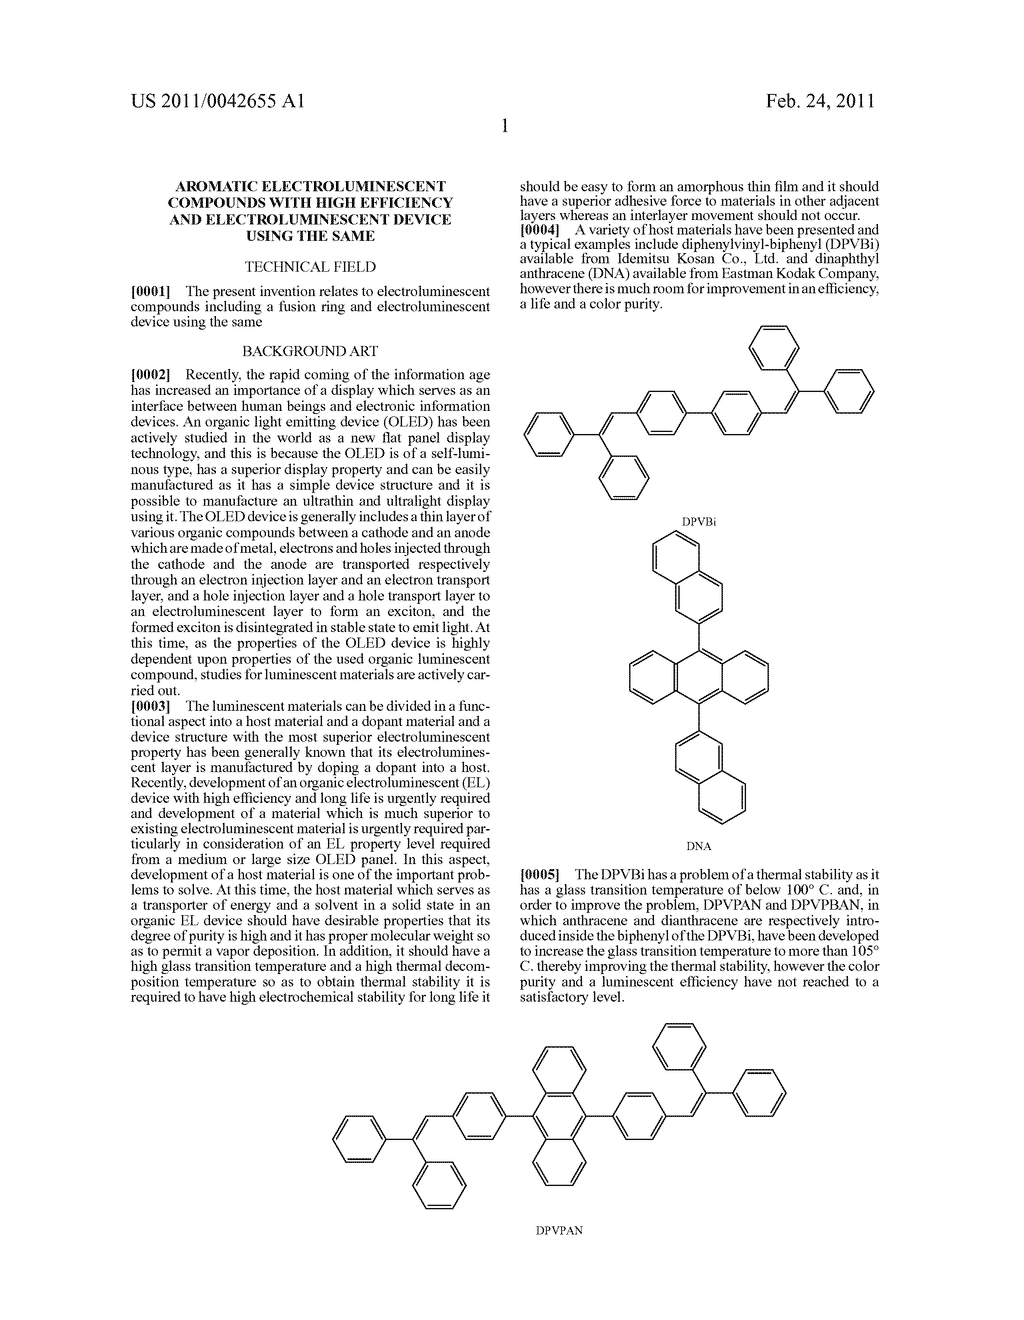 AROMATIC ELECTROLUMINESCENT COMPOUNDS WITH HIGH EFFICIENCY AND ELECTROLUMINESCENT DEVICE USING THE SAME - diagram, schematic, and image 02